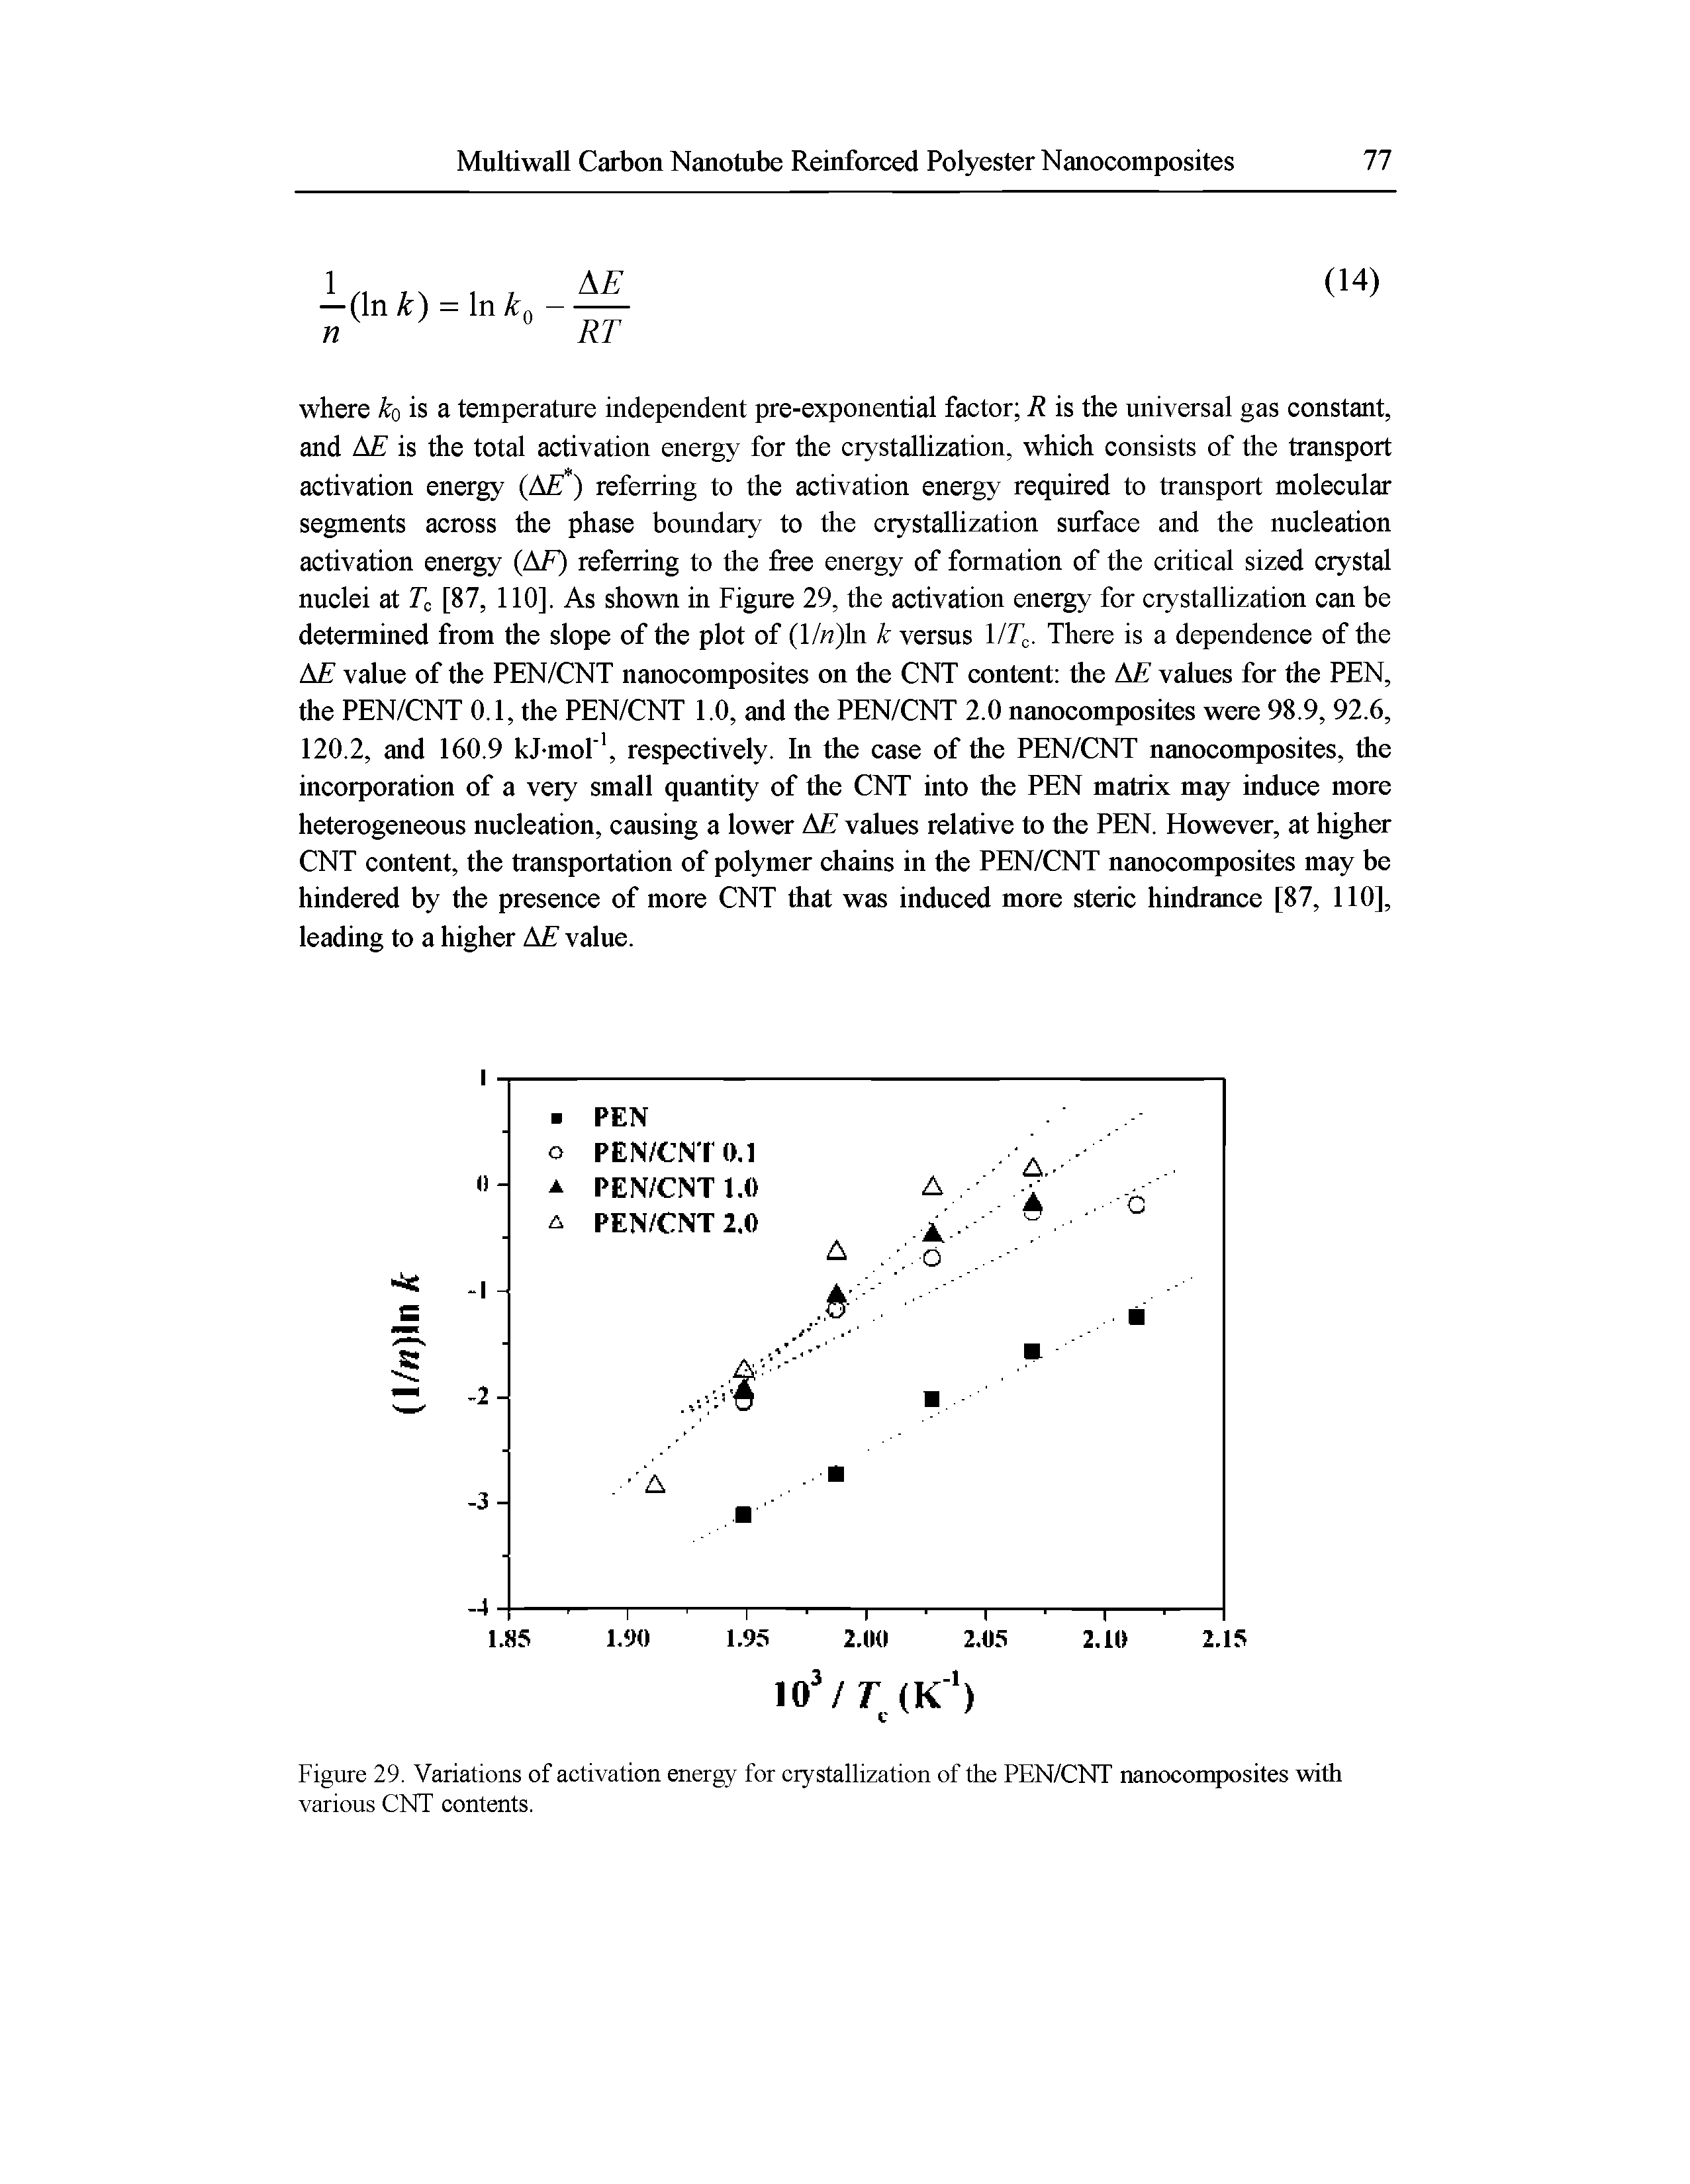 Figure 29. Variations of activation energy for crystallization of the PEN/CNT nanoeomposites with various CNT contents.